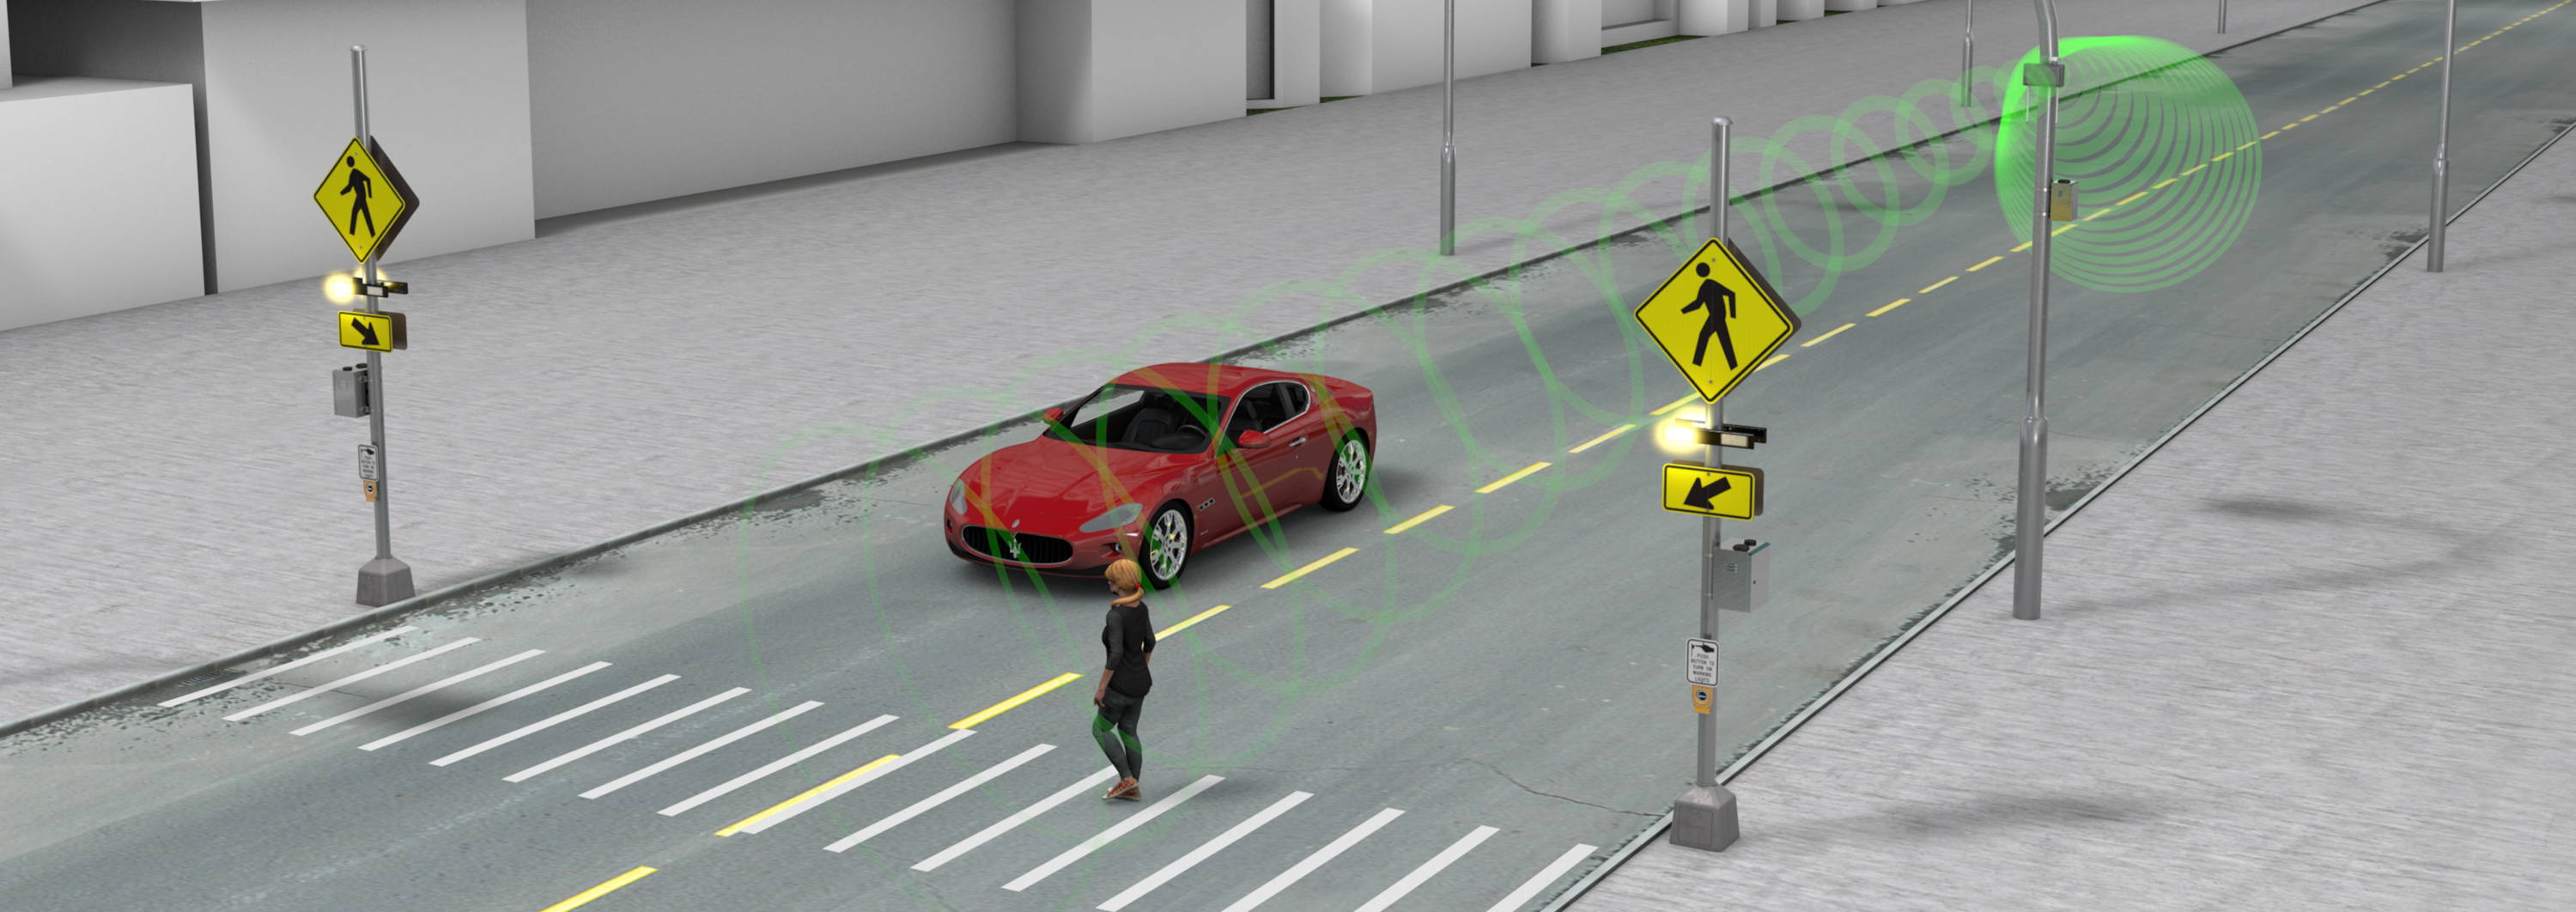 CV technology actively warning an oncoming vehicle of a pedestrian in the crosswalk.